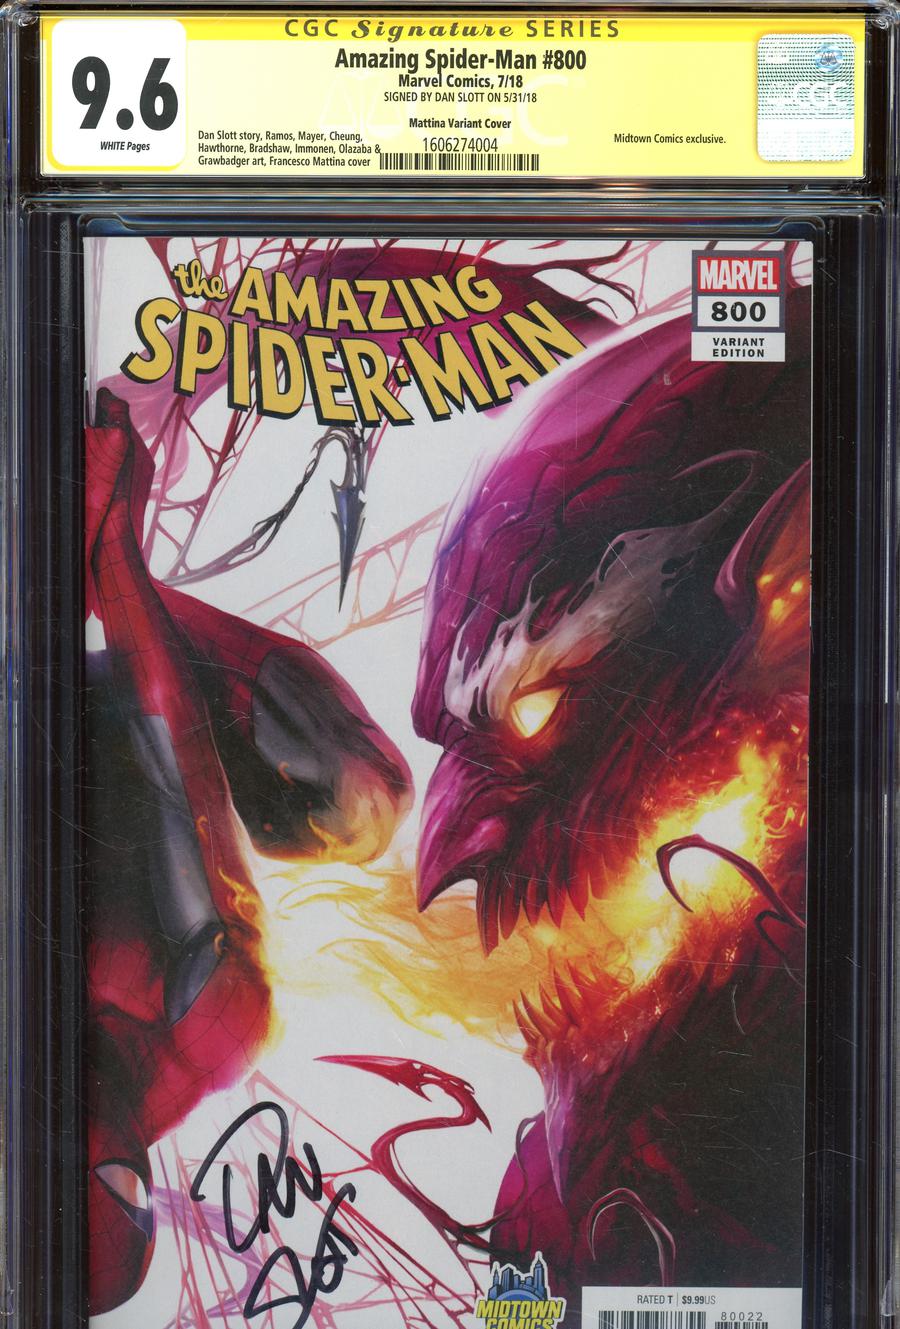 Amazing Spider-Man Vol 4 #800  Midtown Exclusive Francesco Mattina & Will Sliney Connecting Variant Cover Signed By Dan Slott CGC 9.6